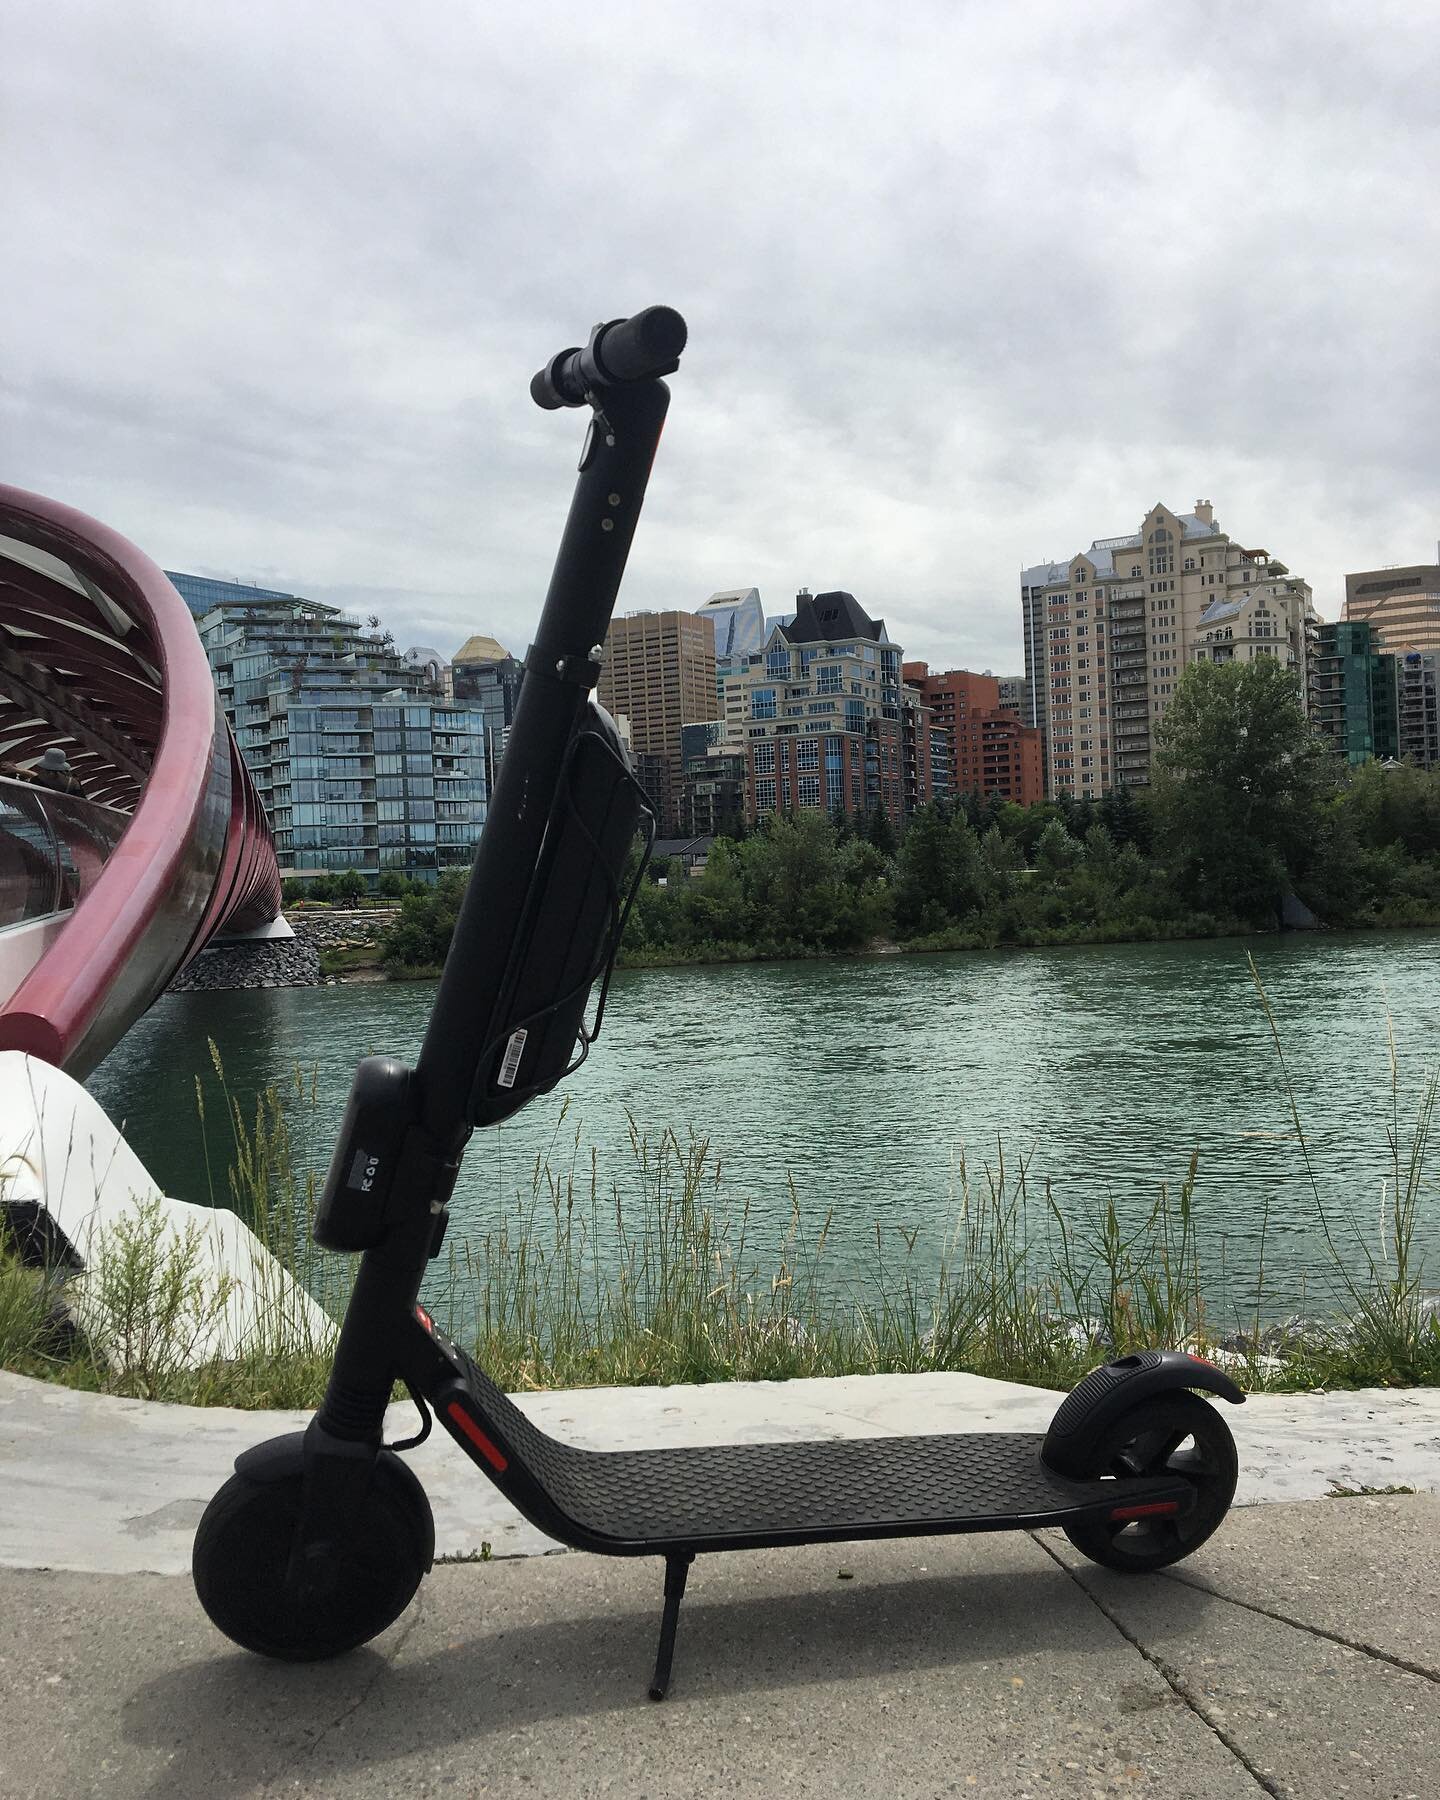 Used scooters at affordable prices!! 
Our partner company @yycsegwaytours is selling gently used ES4 KickScooters. Pricing is as follows:
1 scooter = $650 
Buy 2 scooters = $600 each
Buy 3 scooters = $550 each
Buy 4 or more scooters = $500 each. 
All